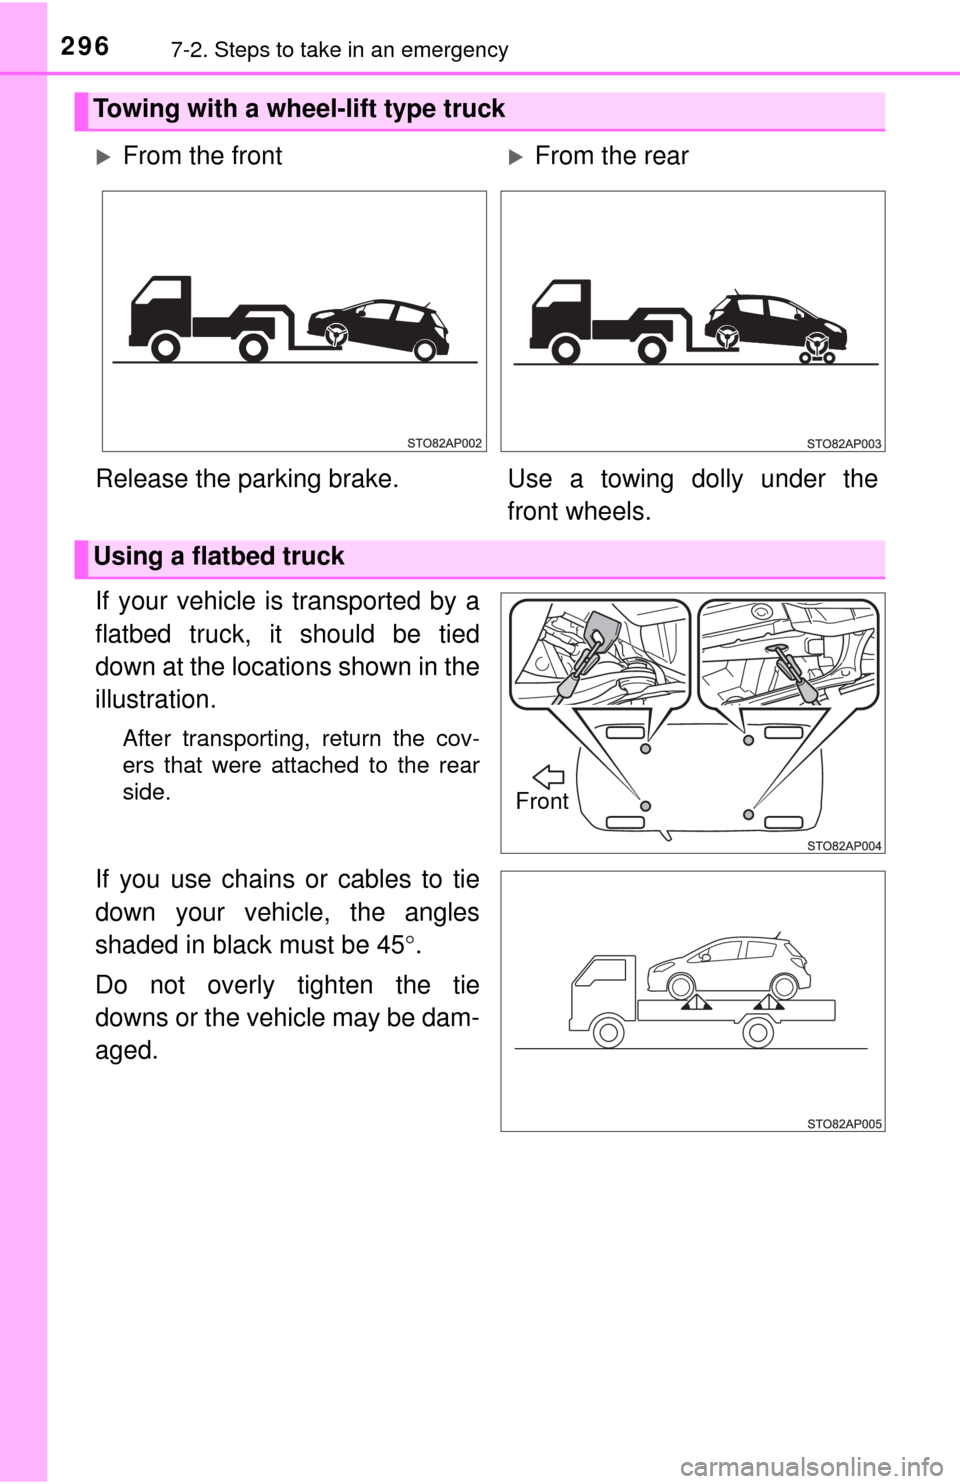 TOYOTA YARIS 2017 3.G Owners Manual 2967-2. Steps to take in an emergency
If your vehicle is transported by a
flatbed truck, it should be tied
down at the locations shown in the
illustration.
After transporting, return the cov-
ers that